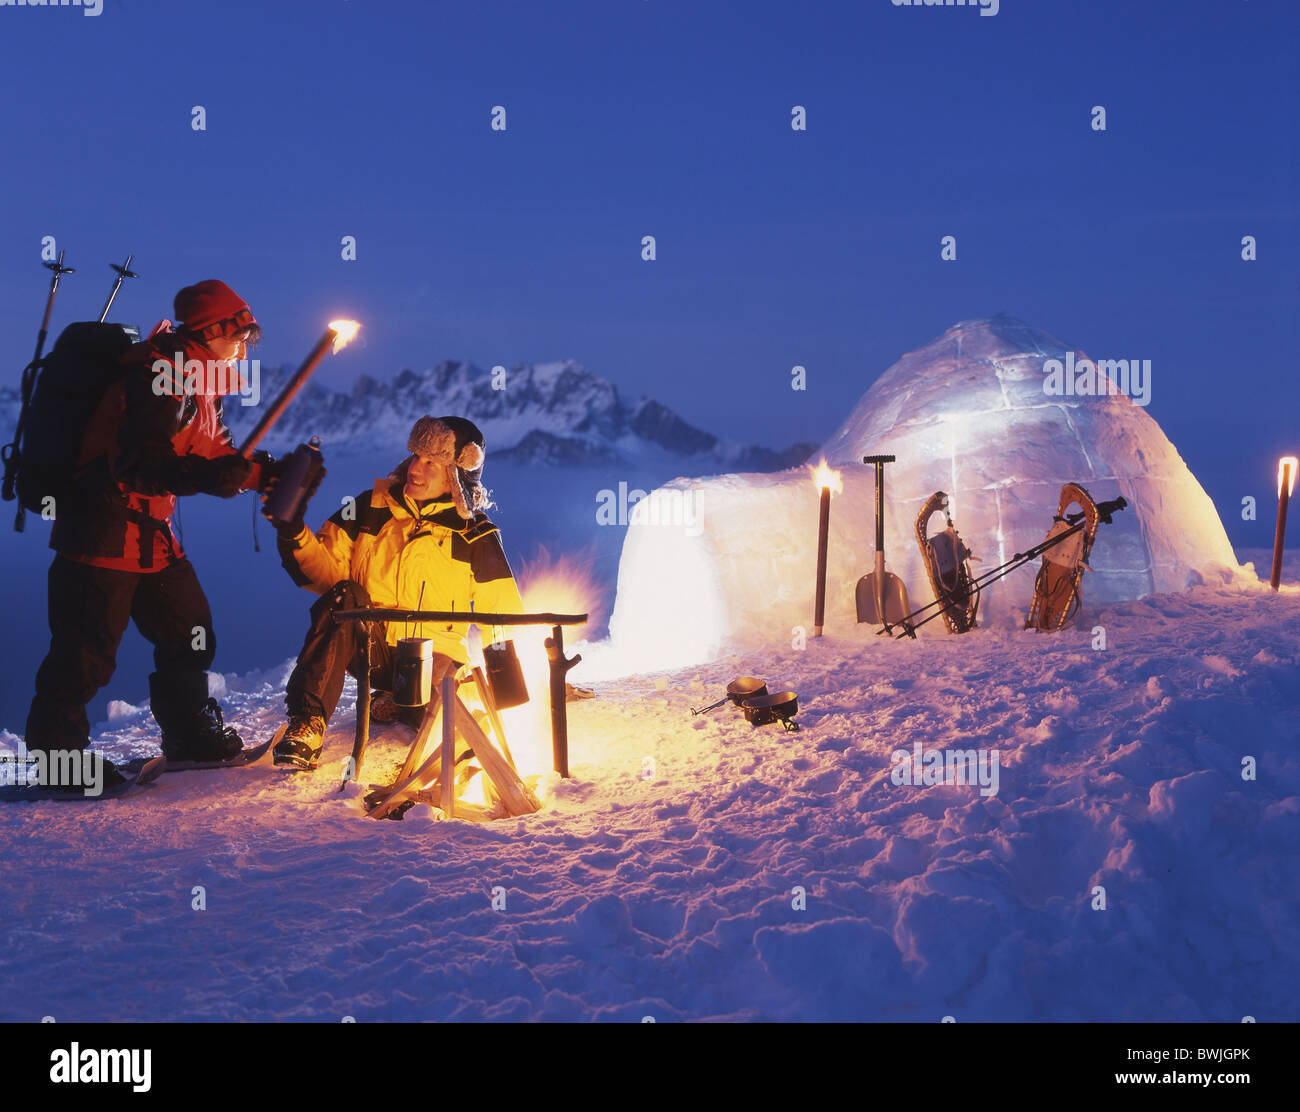 Couple fire campfire torches snow shoes snow shoe walking igloo illuminated Pizol mountains Alps winter sn Stock Photo